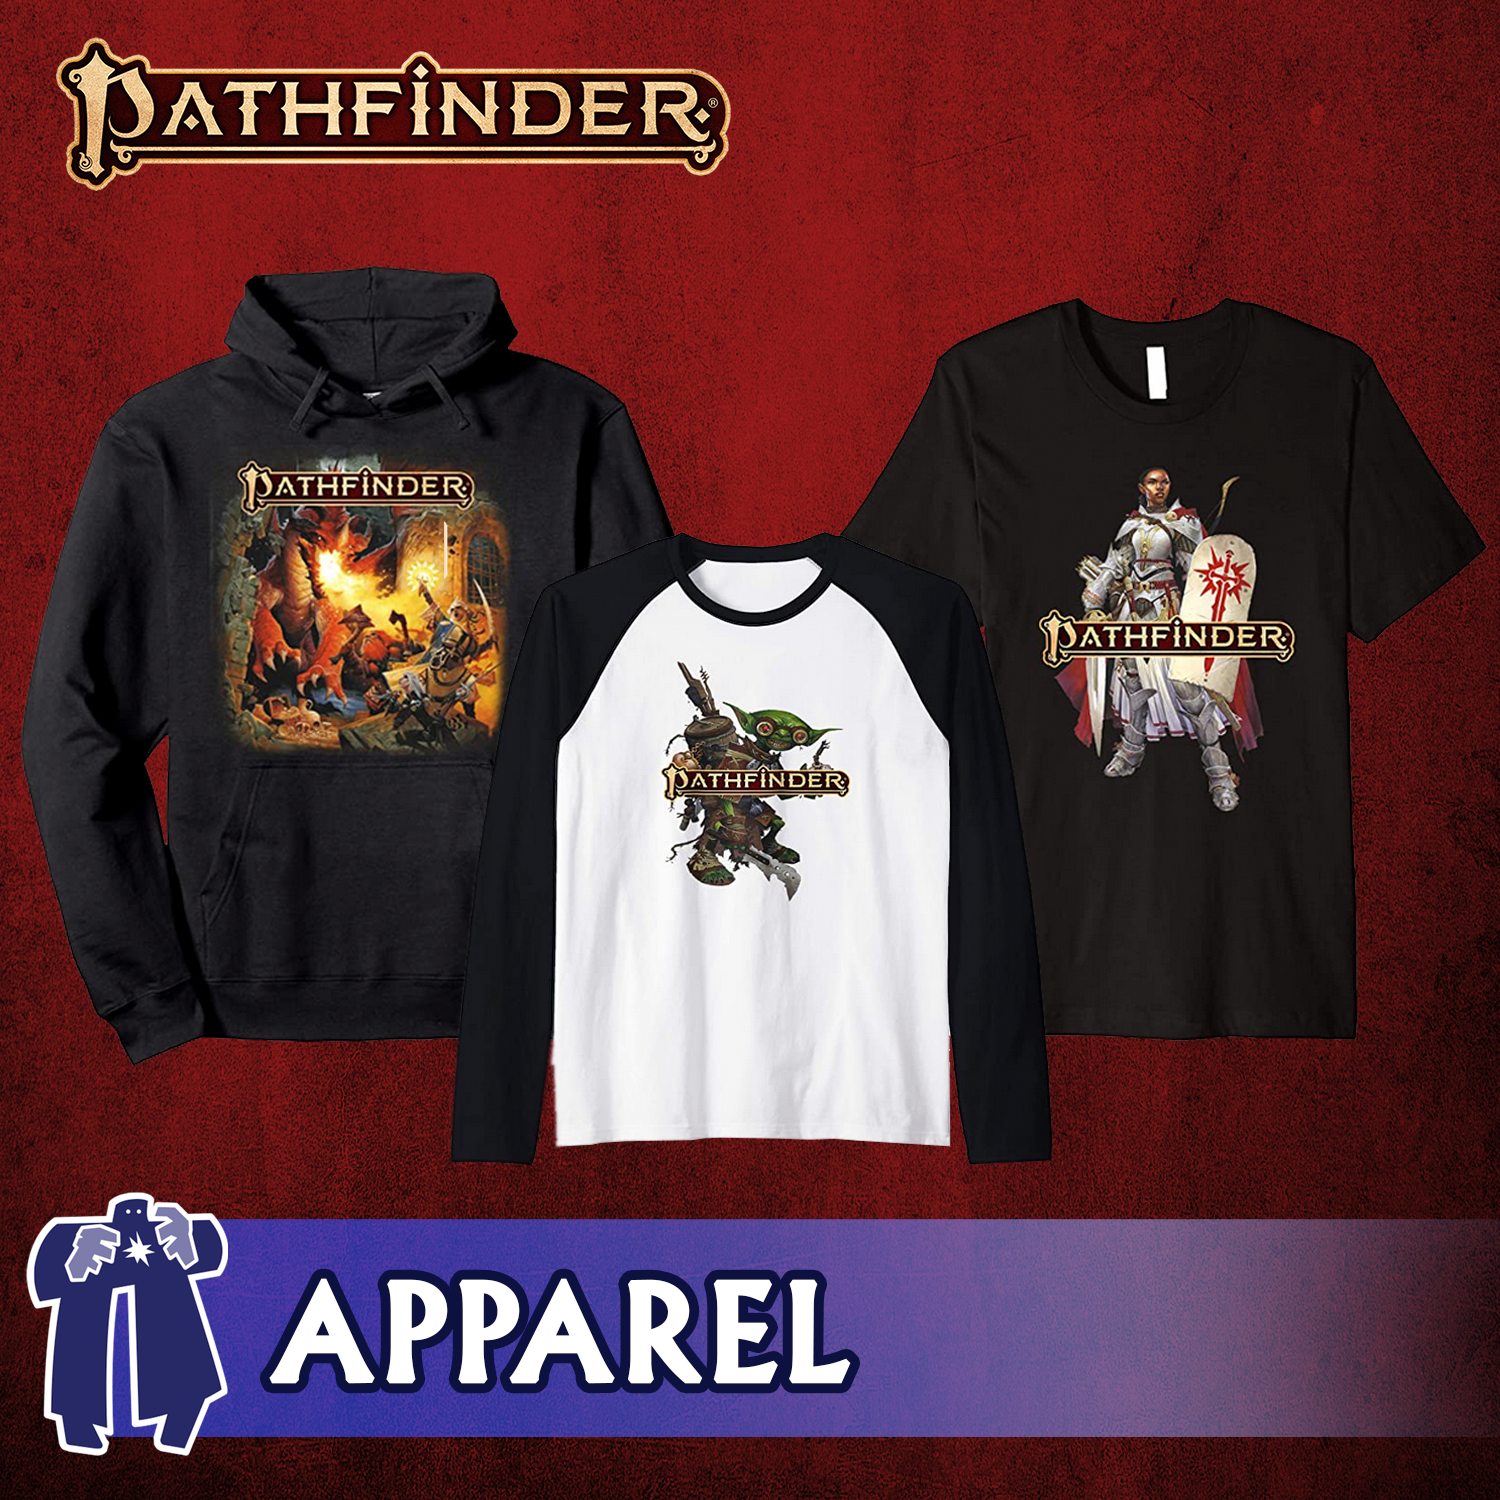 Images showing the Pathfinder apparel available via Amazon.